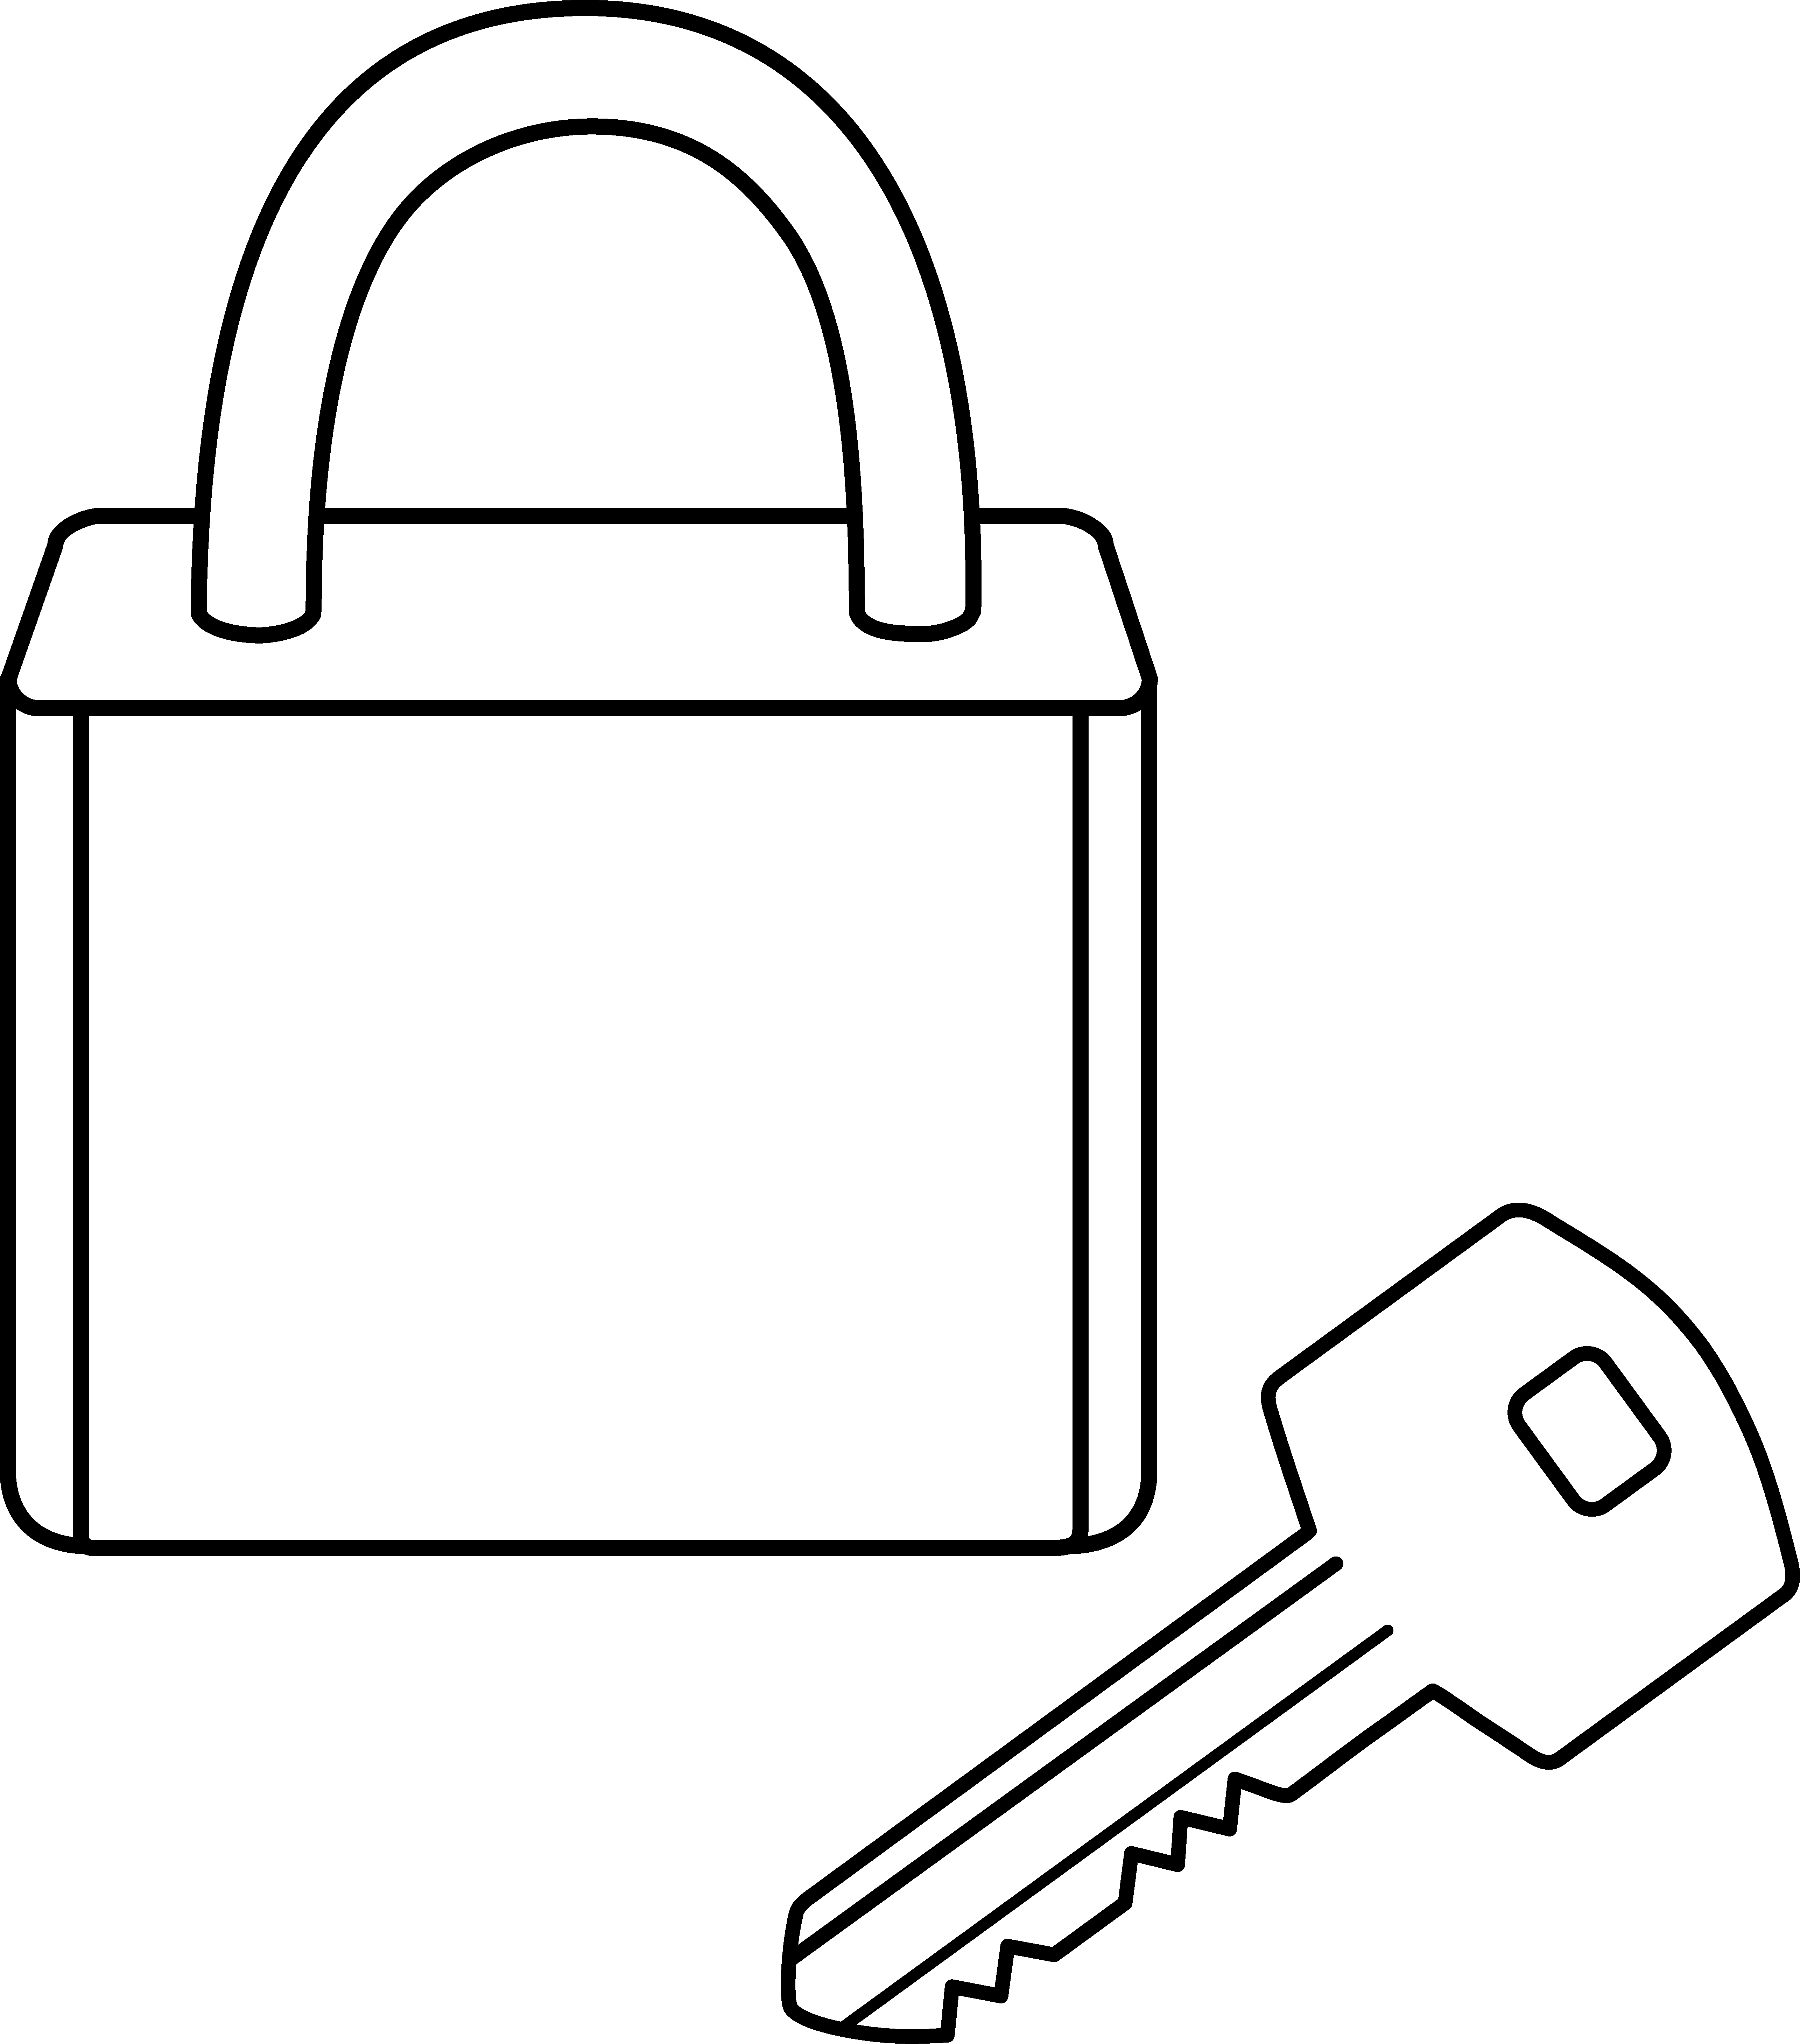 lock clipart outline images